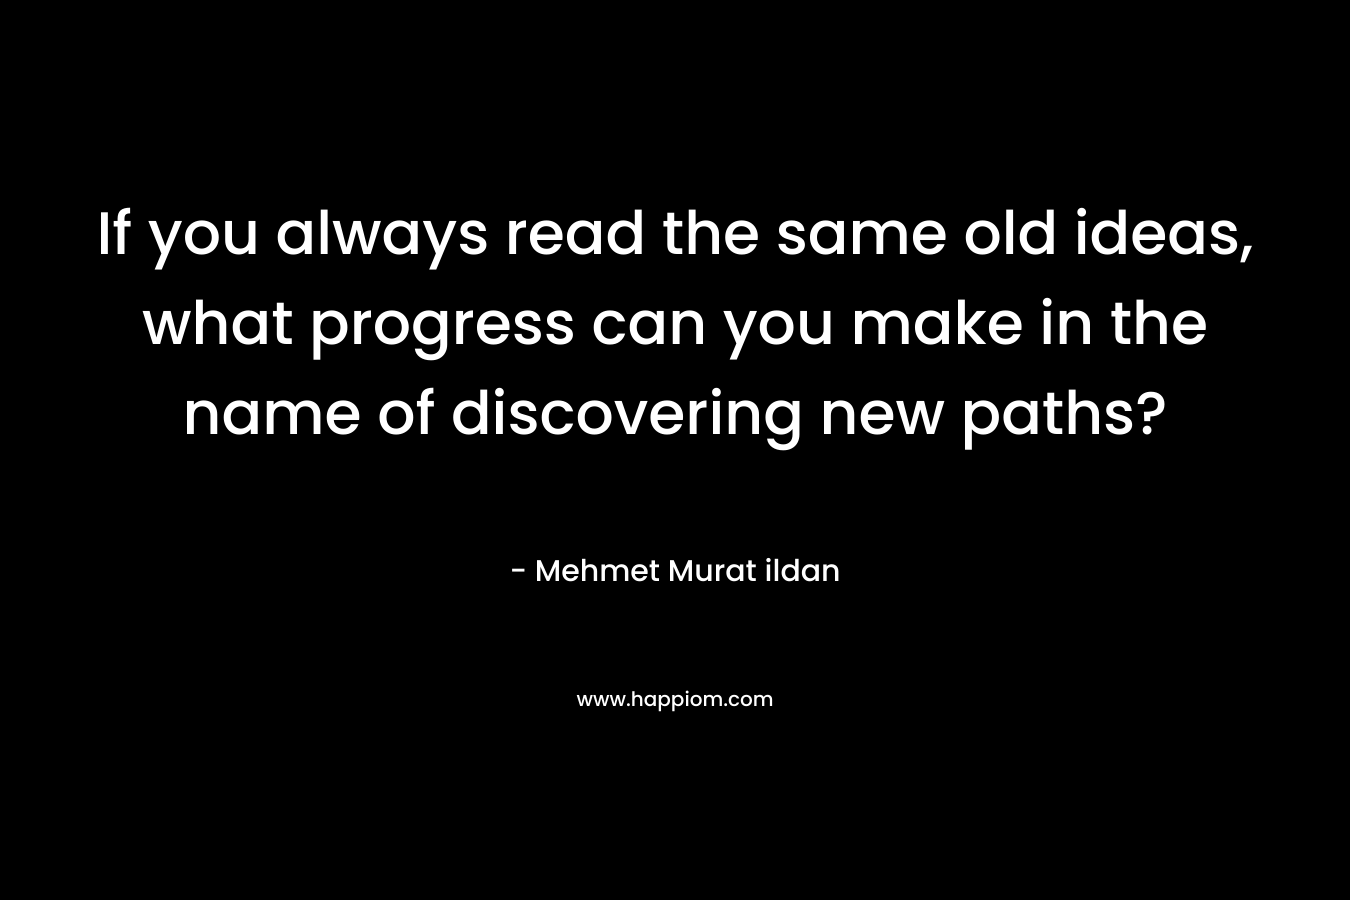 If you always read the same old ideas, what progress can you make in the name of discovering new paths? – Mehmet Murat ildan